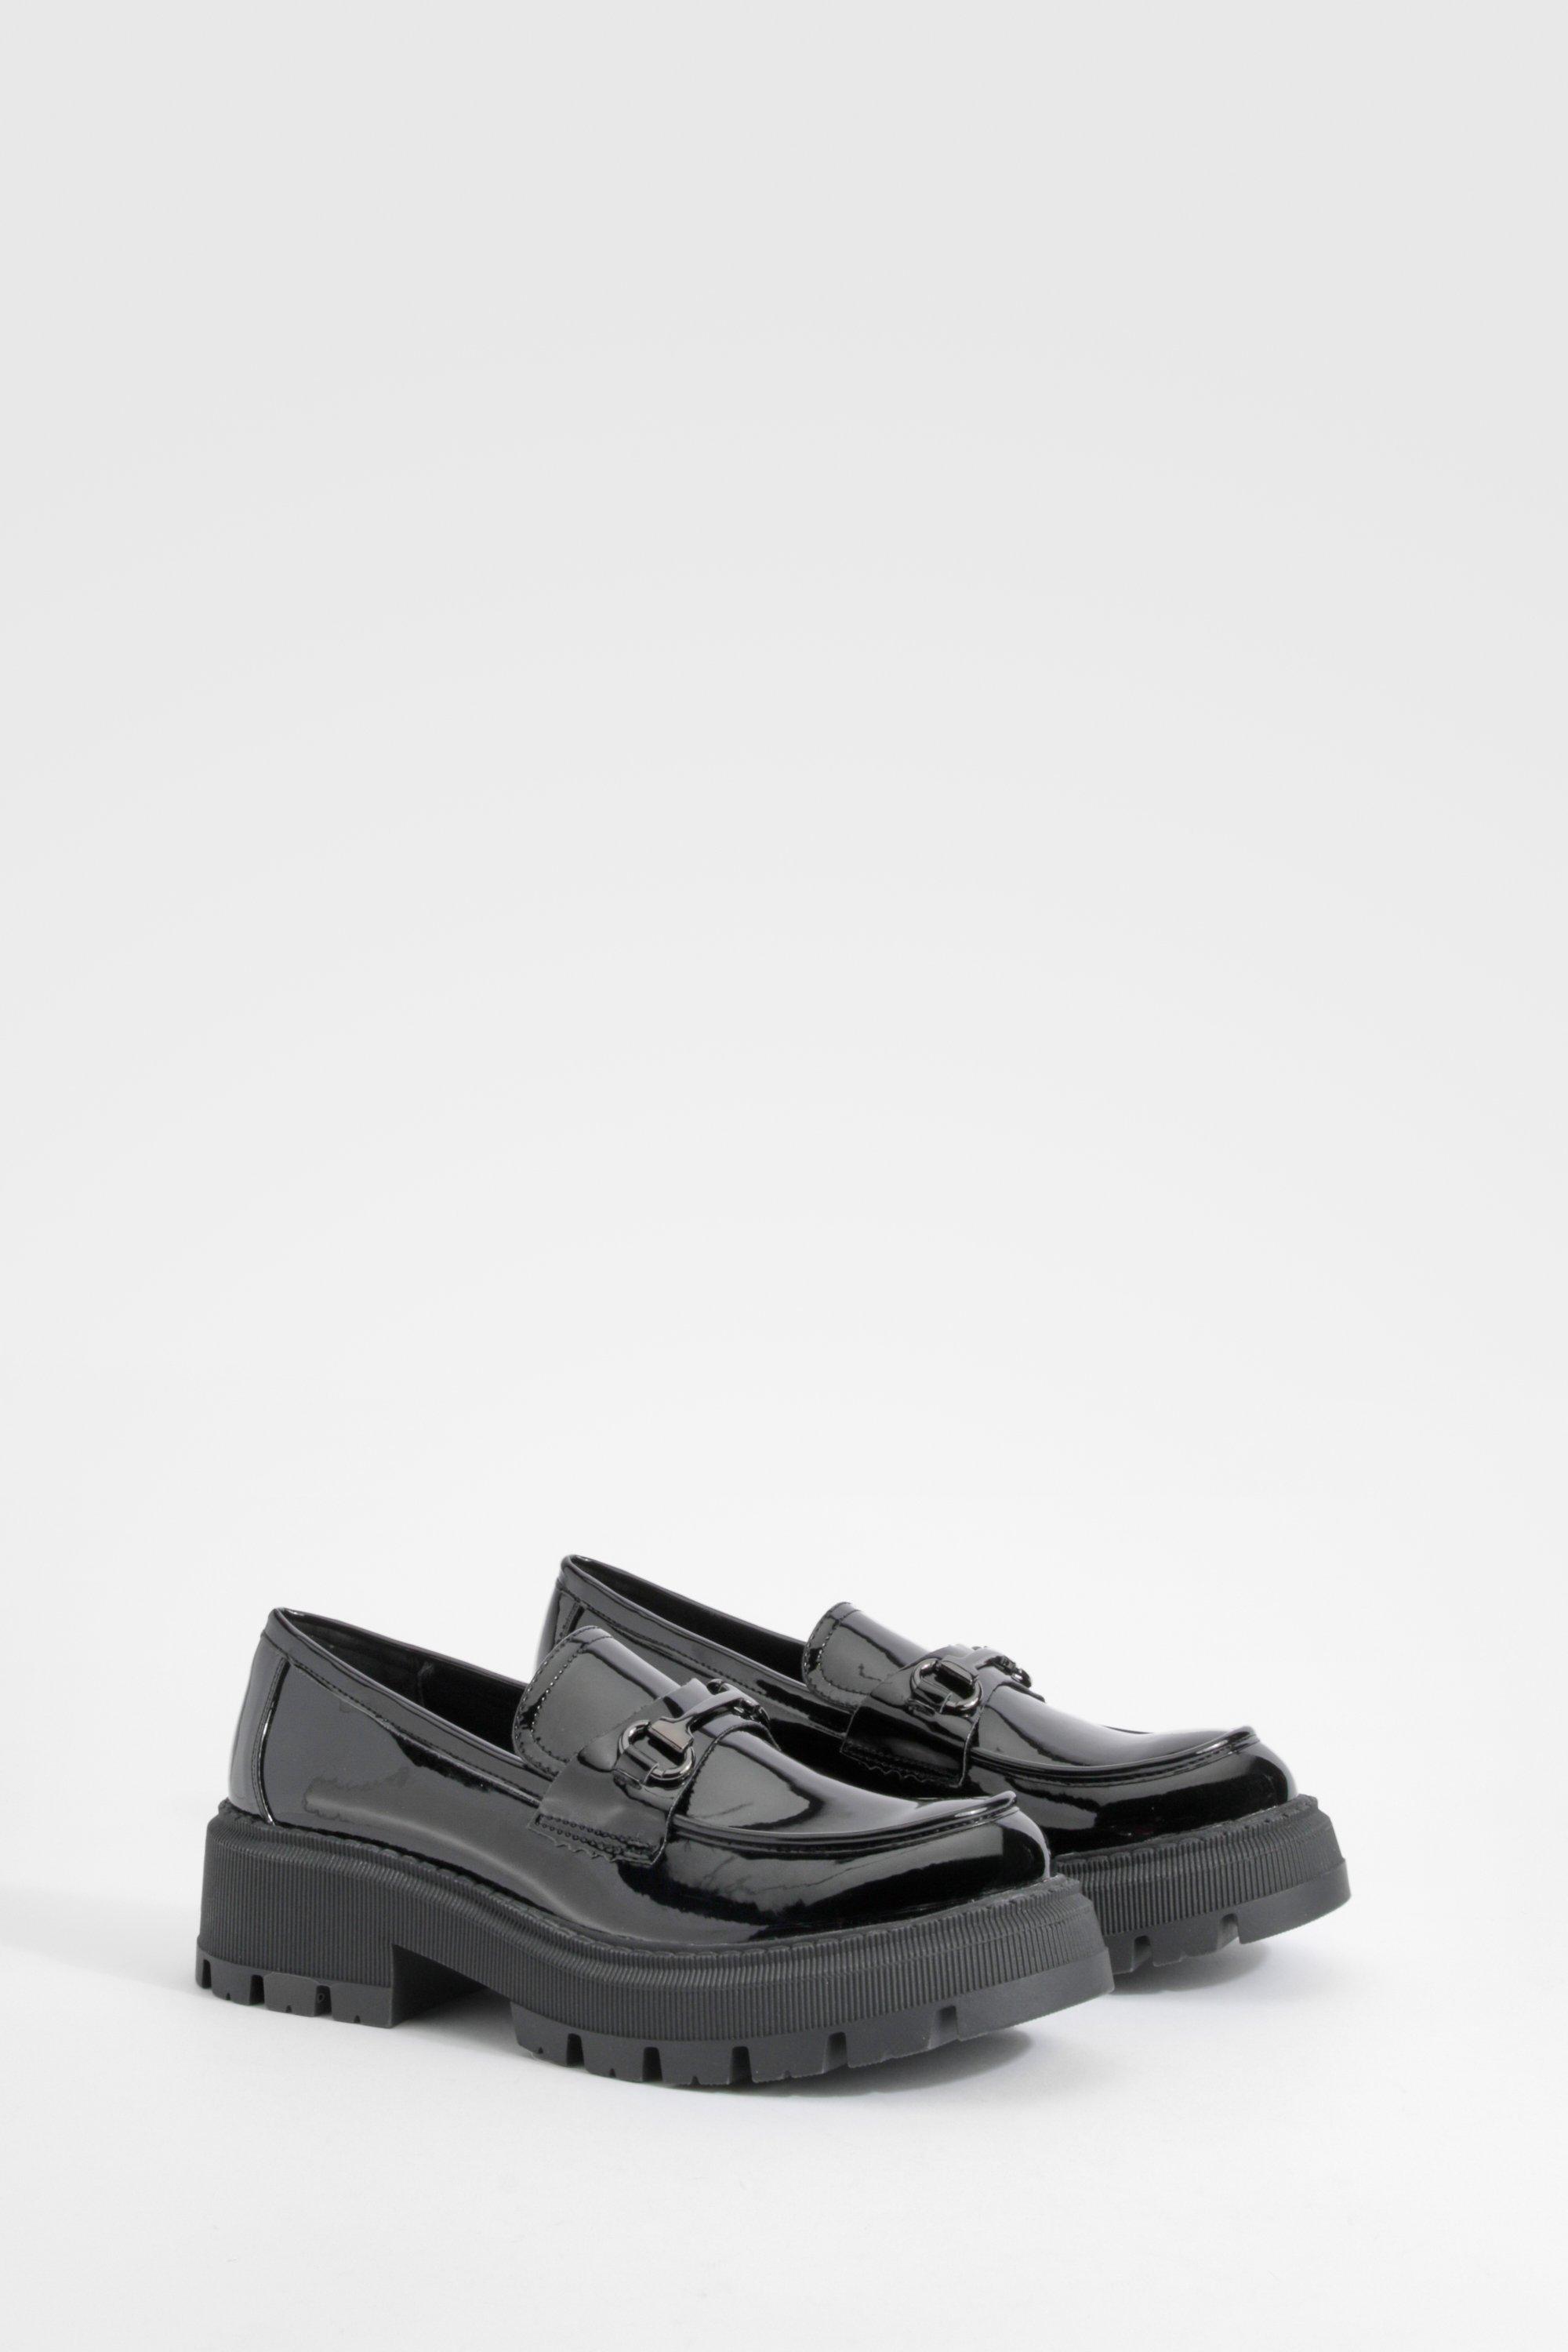 Image of Patent Chunky T Bar Loafers, Nero